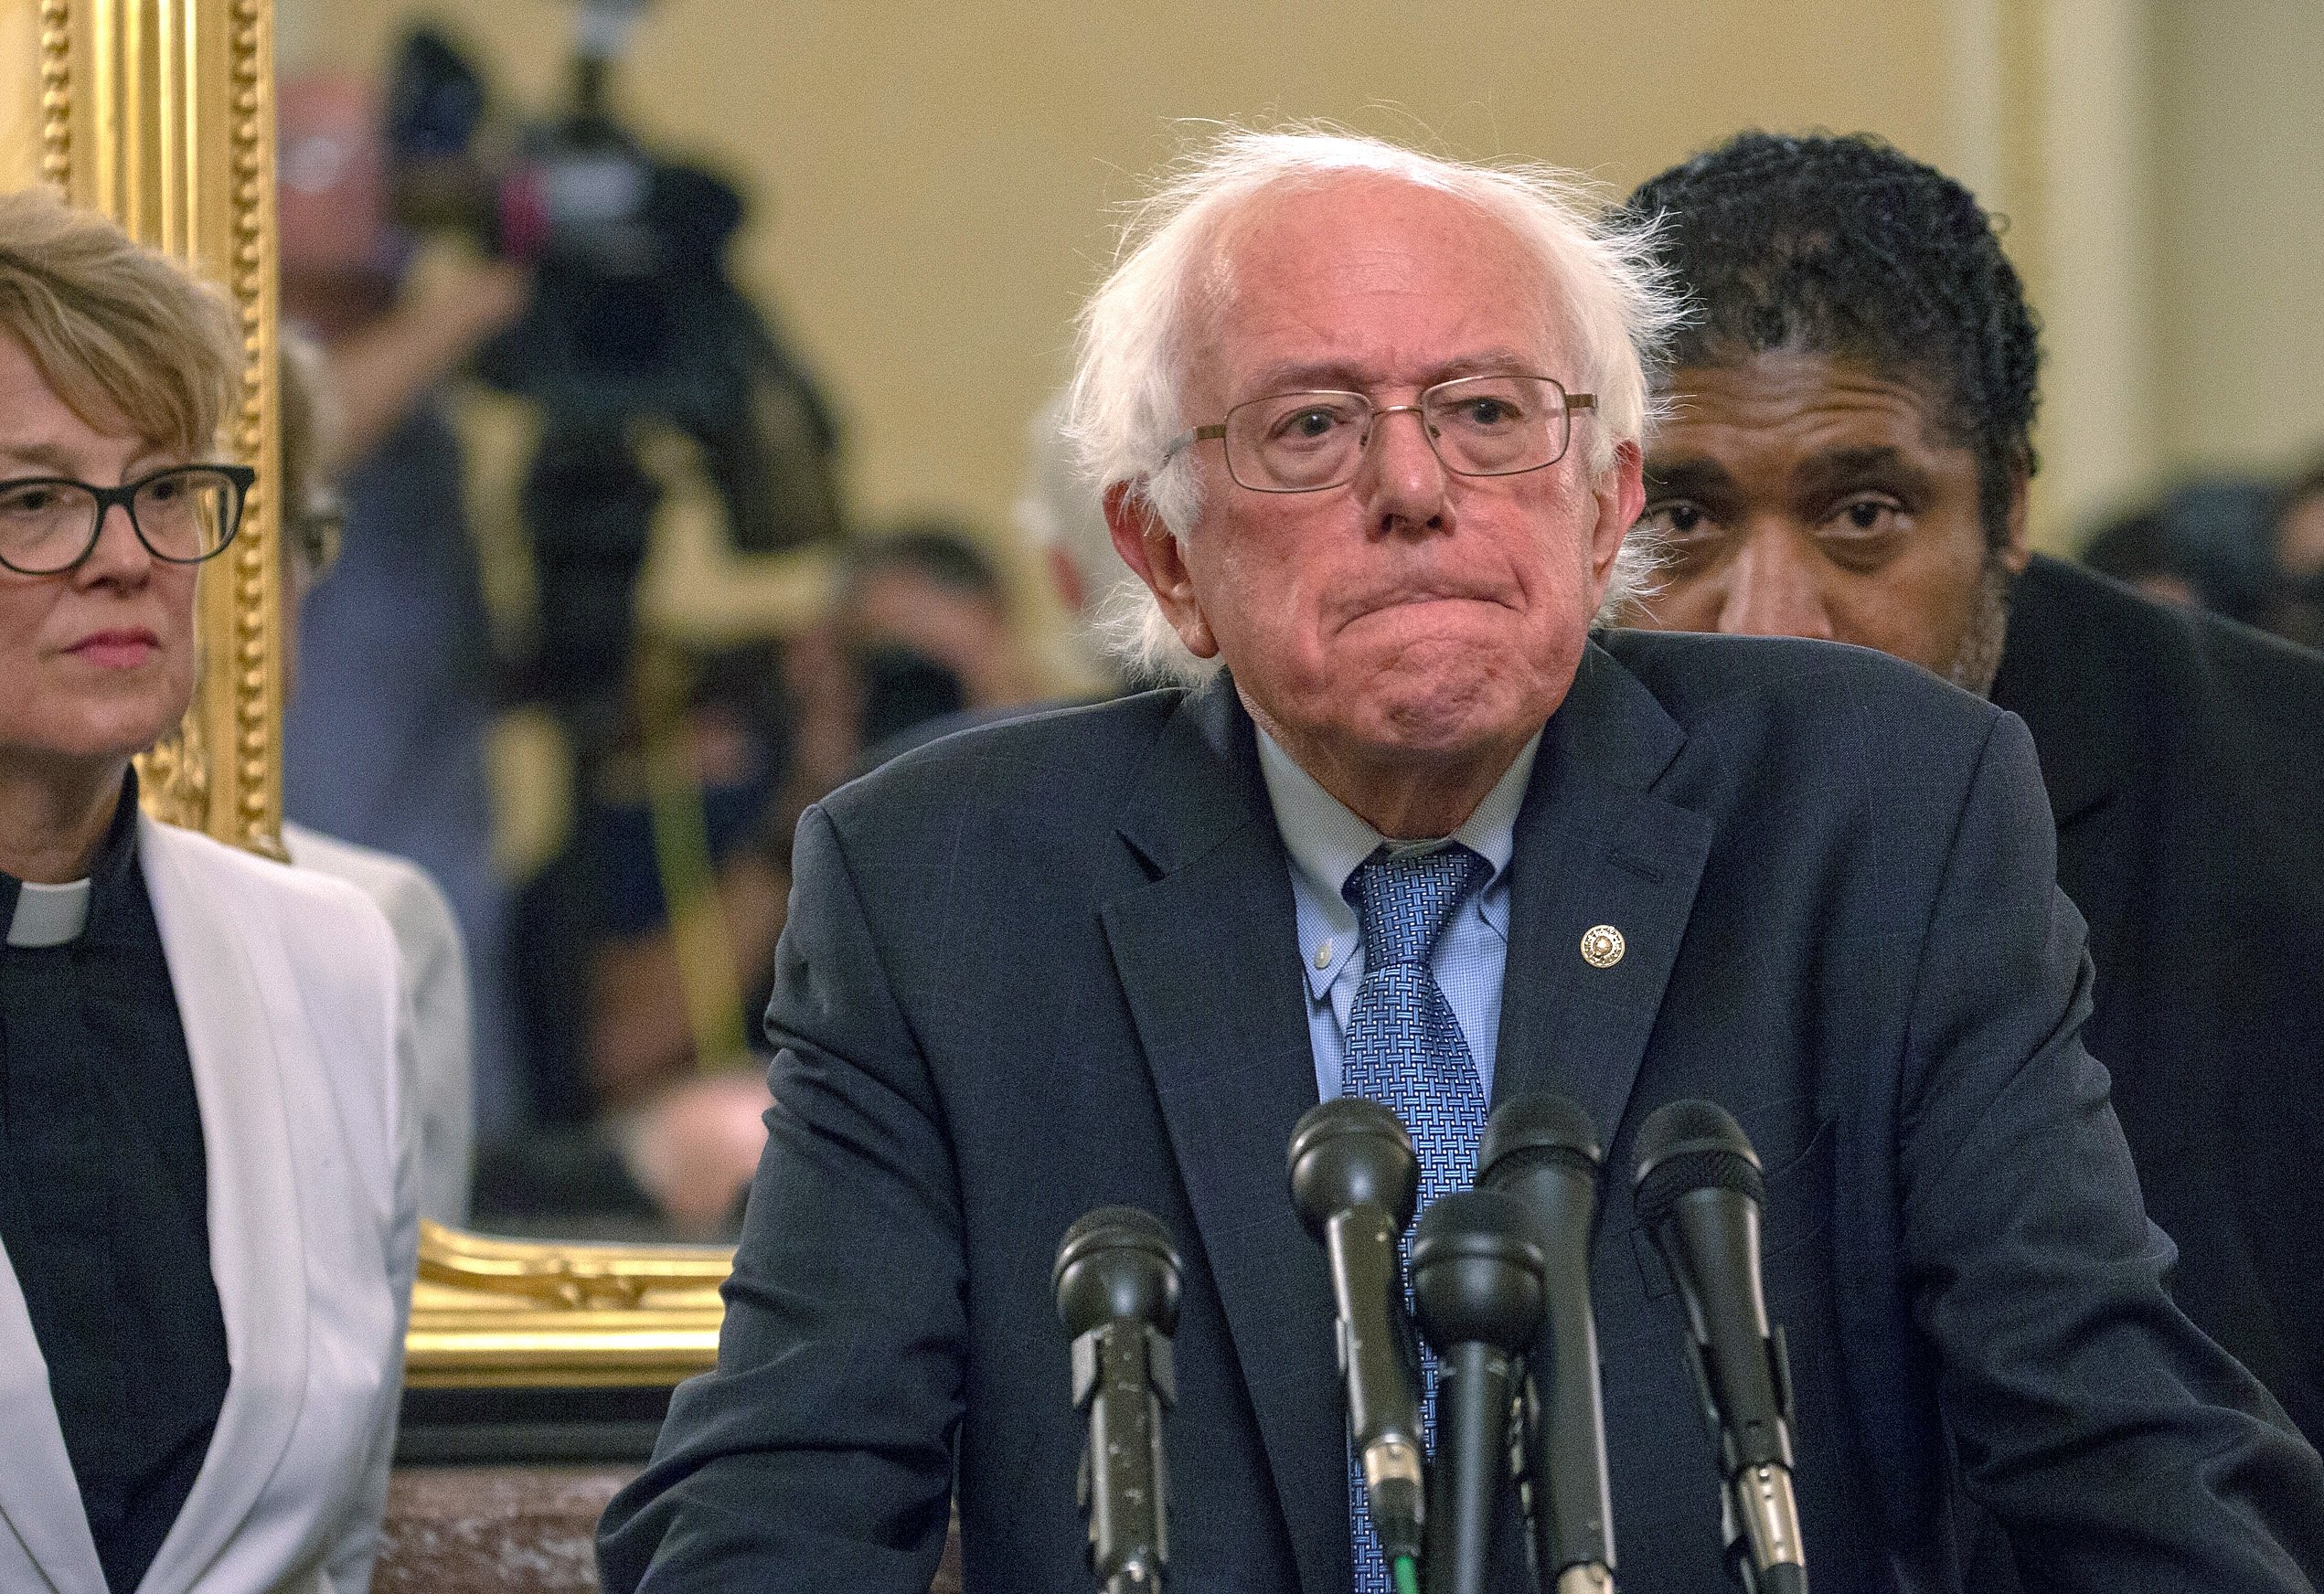 Sen. Bernie Sanders attends a press conference on July 24, 2018 in Washington, DC. (Tasos Katopodis/Getty Images)